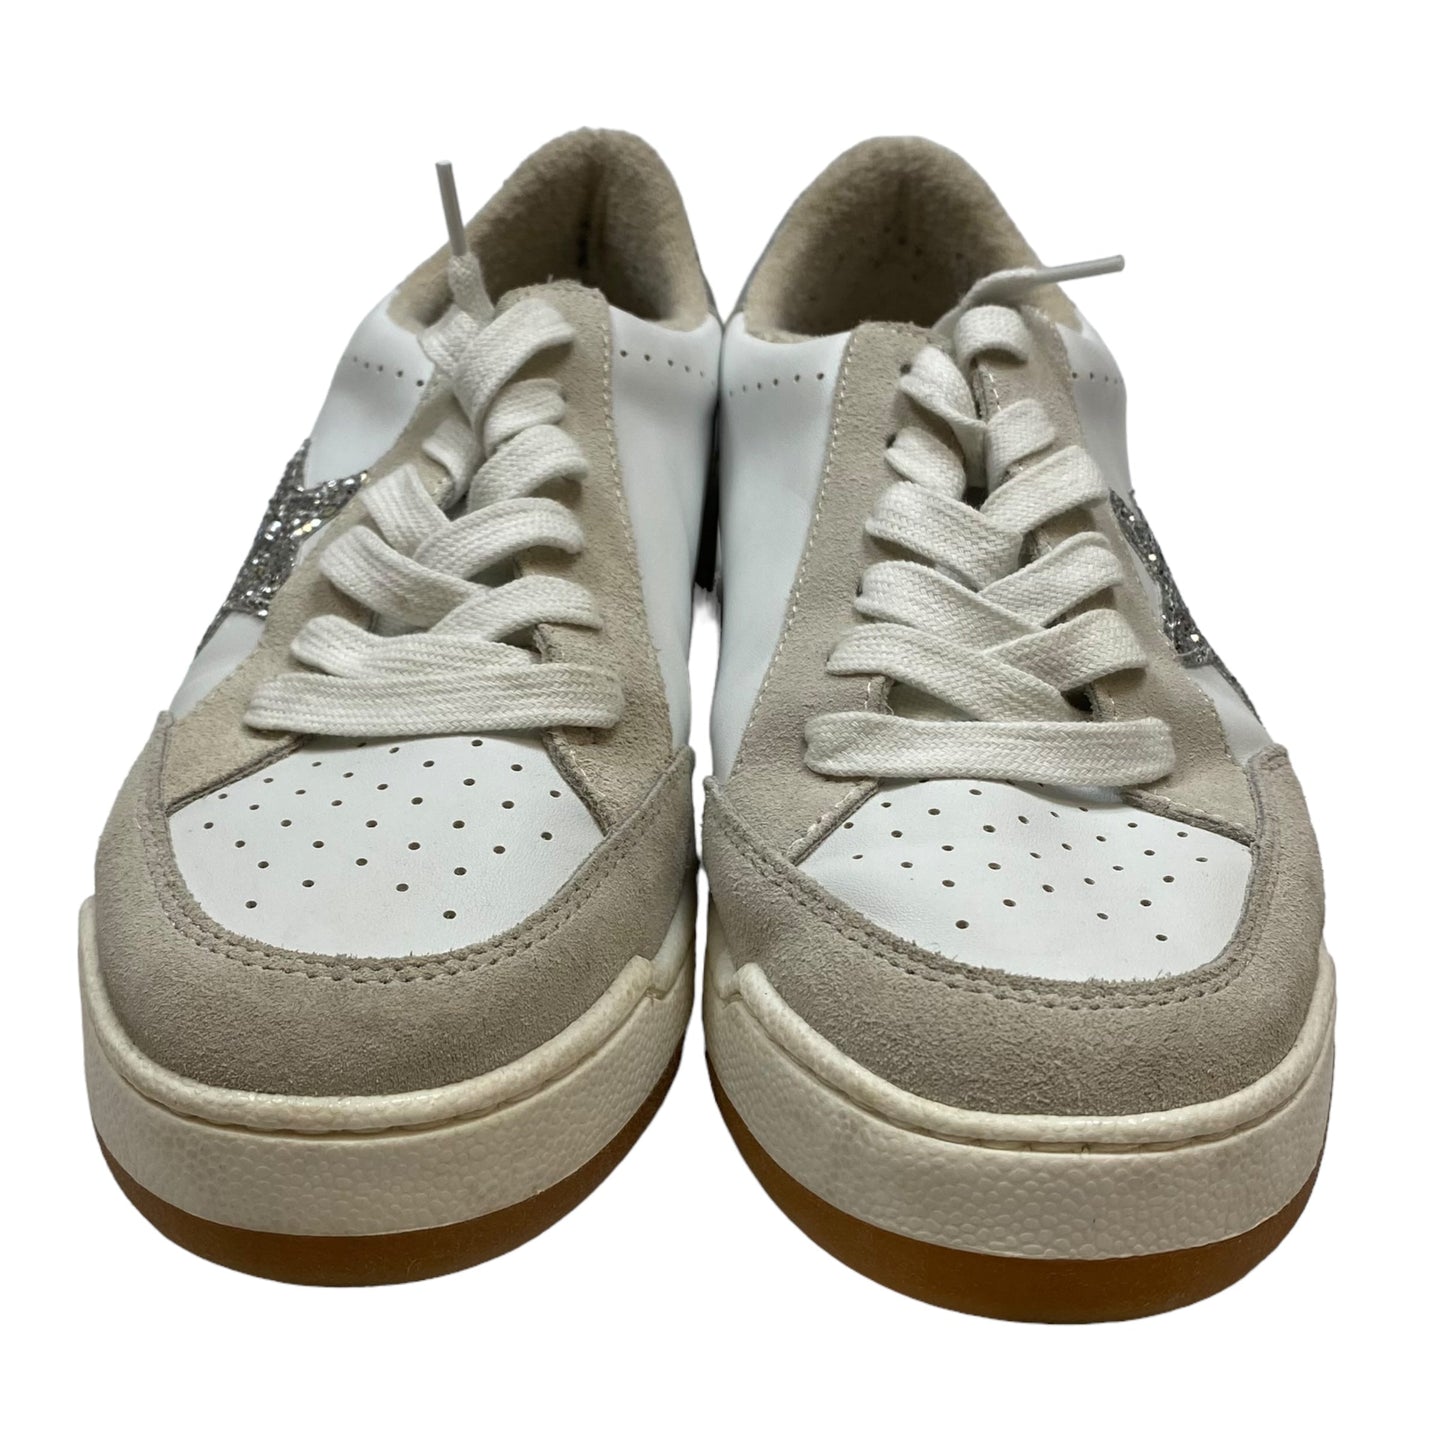 White Shoes Sneakers Steve Madden, Size 8.5